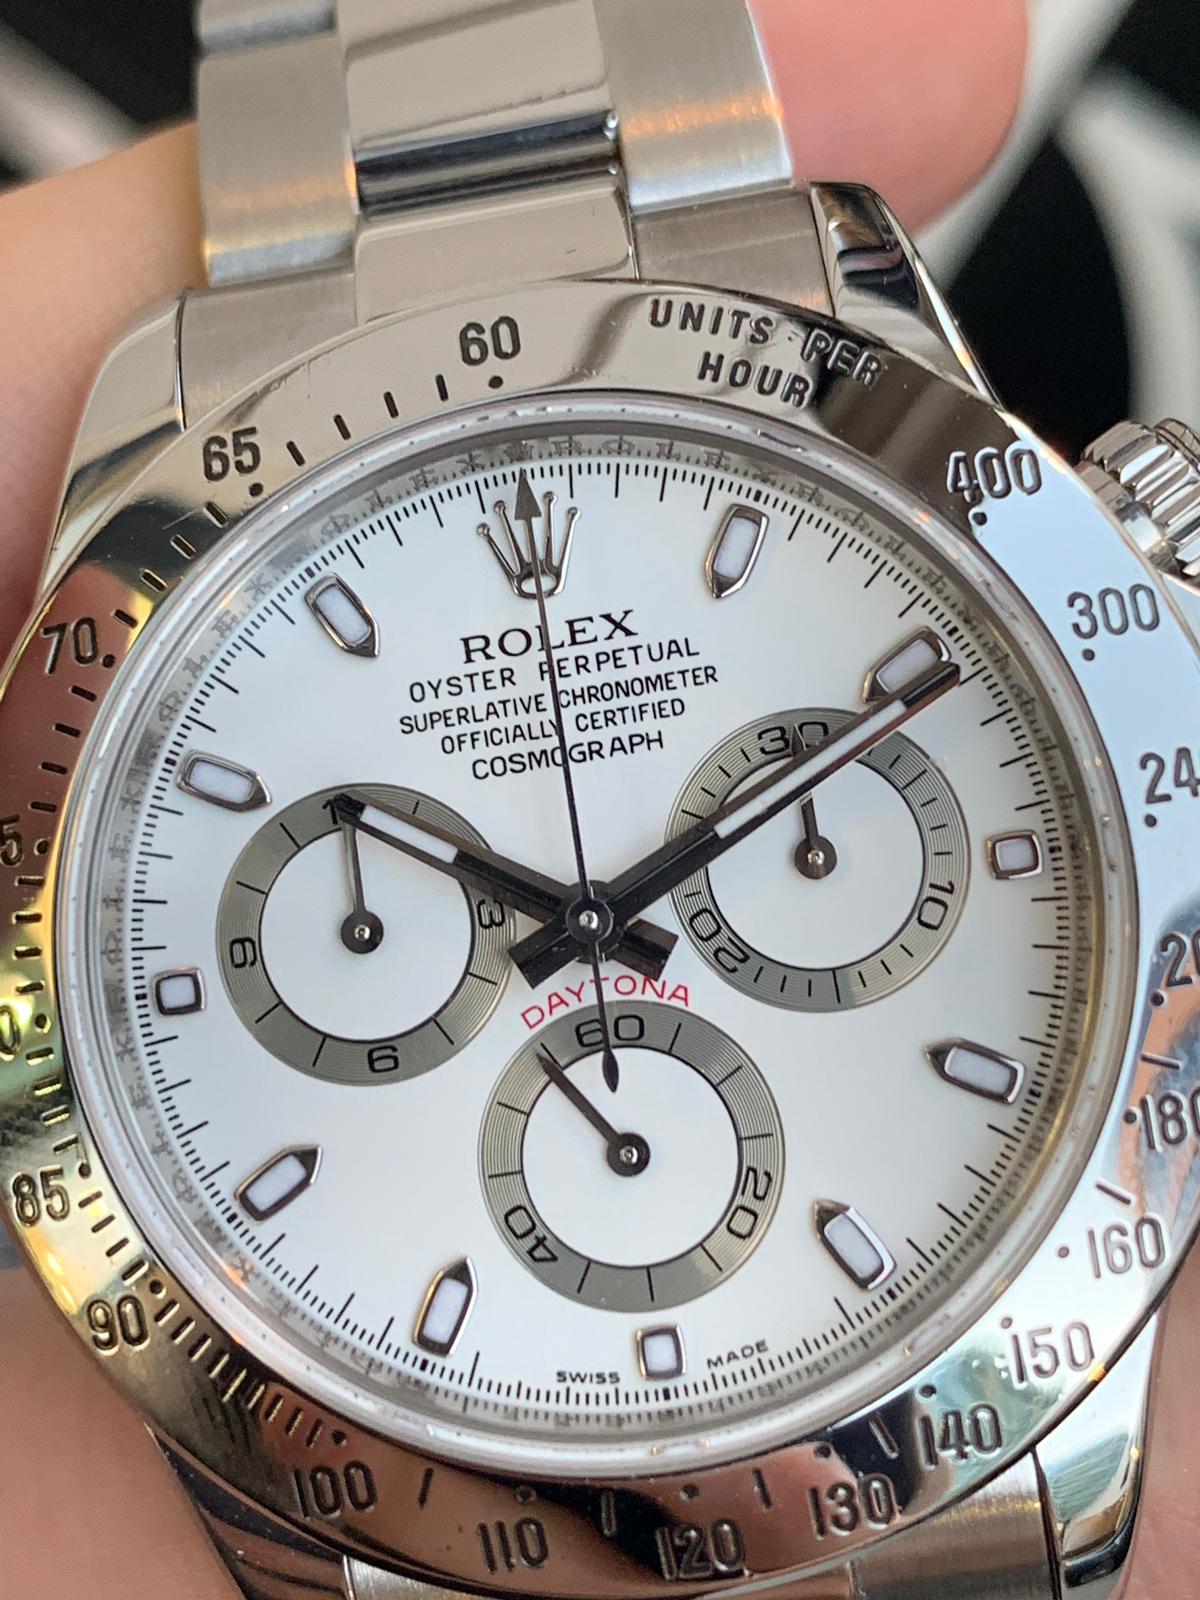 ROLEX COSMOGRAPH DAYTONA 116520 STAINLESS STEEL - Carr Watches Rolex Daytona Watch Stainless Steel